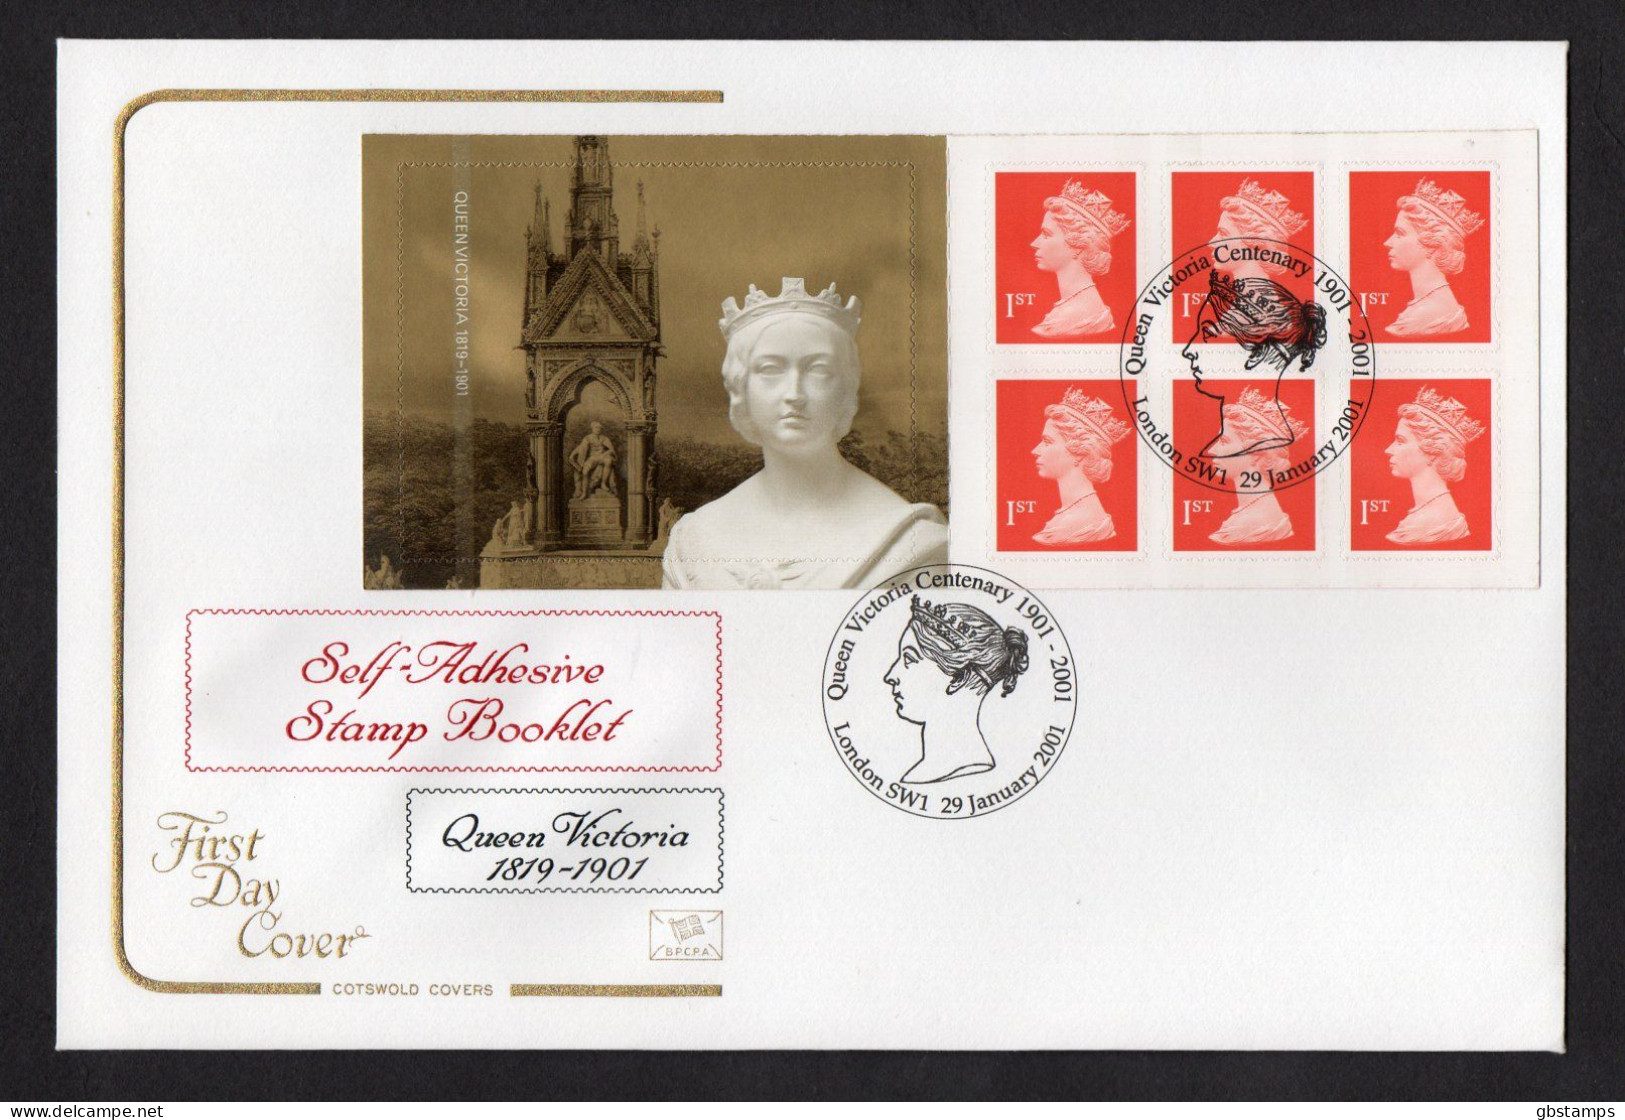 2001 Queen Victoria Centenary Self Adhesive Booklet SG MB2 Clean Cotswold FDC Post Free(UK) - 2001-2010 Decimal Issues